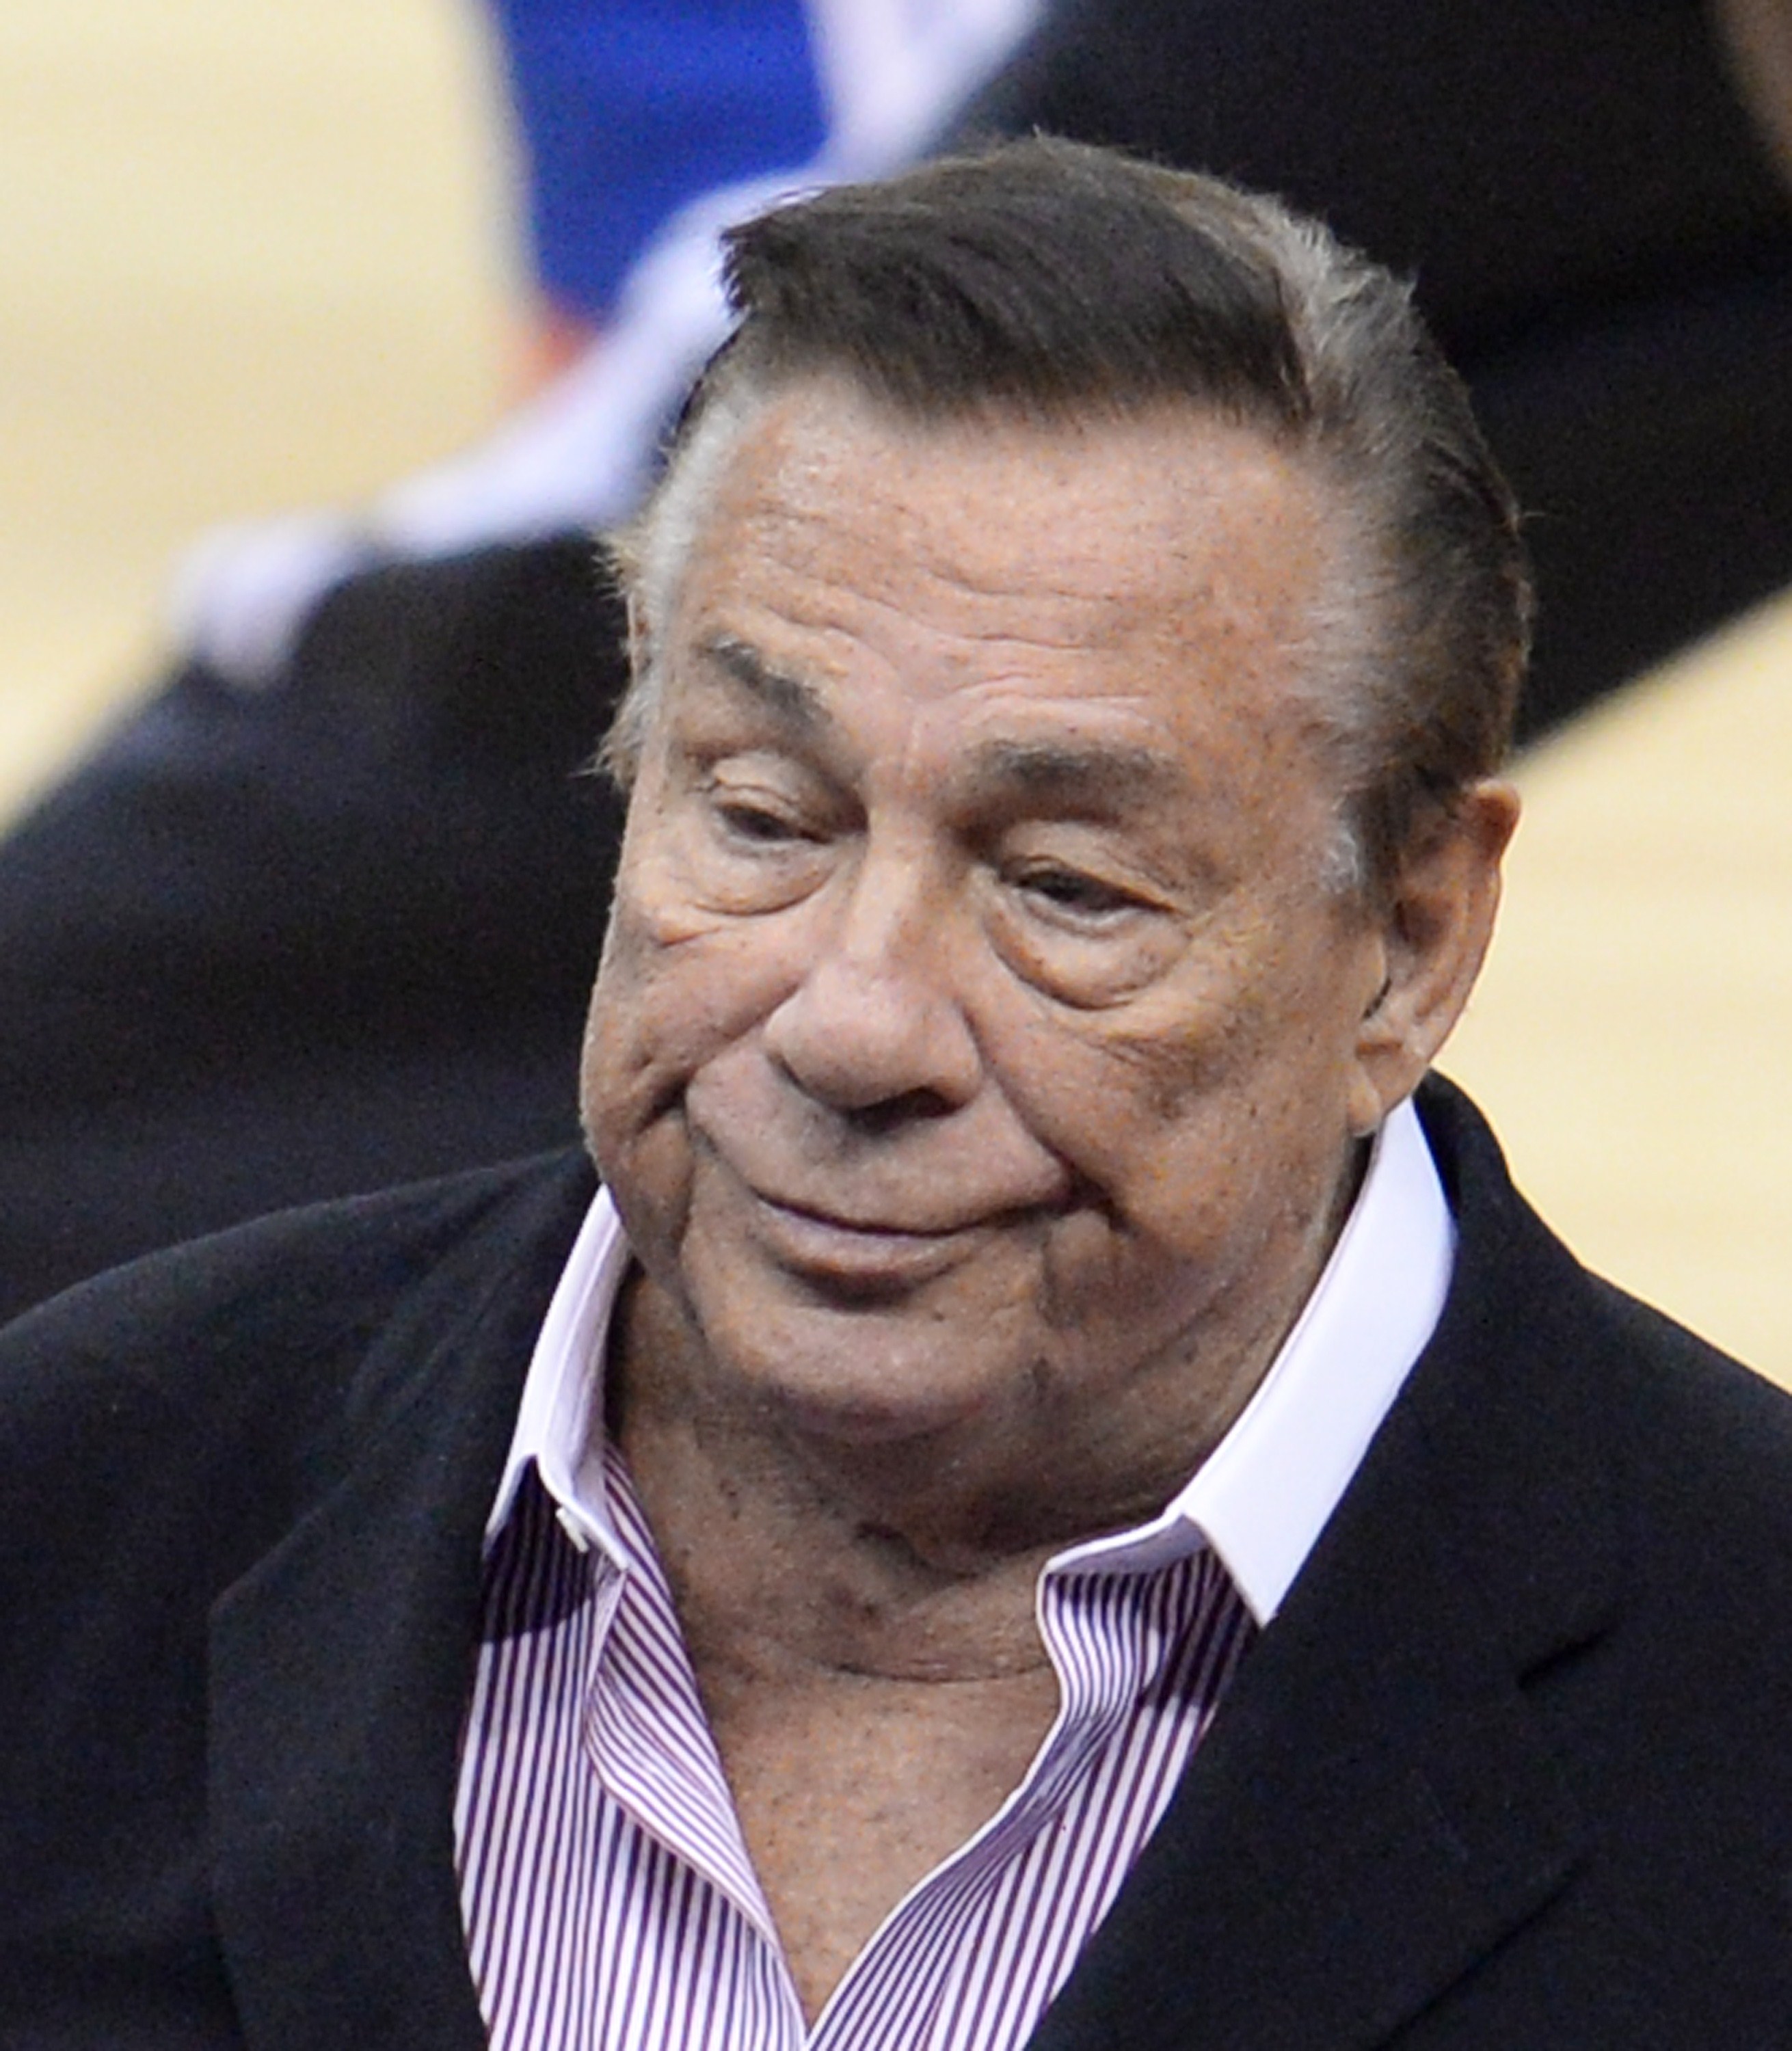 Los Angeles Clippers owner Donald Sterling attends the NBA playoff game between the Clippers and the Golden State Warriors on April 21, 2014 at Staples Center in Los Angeles, California. The NBA banned Sterling for life for "deeply offensive and harmful" racist comments that sparked a national firestorm. NBA Commissioner Adam Silver hit Sterling with every penalty at his disposal, fining him a maximum $2.5 million dollars and calling on other owners to force him to sell his team.   AFP PHOTO / ROBYN BECK        (Photo credit should read ROBYN BECK/AFP/Getty Images) (ROBYN BECK&mdash;AFP/Getty Images)